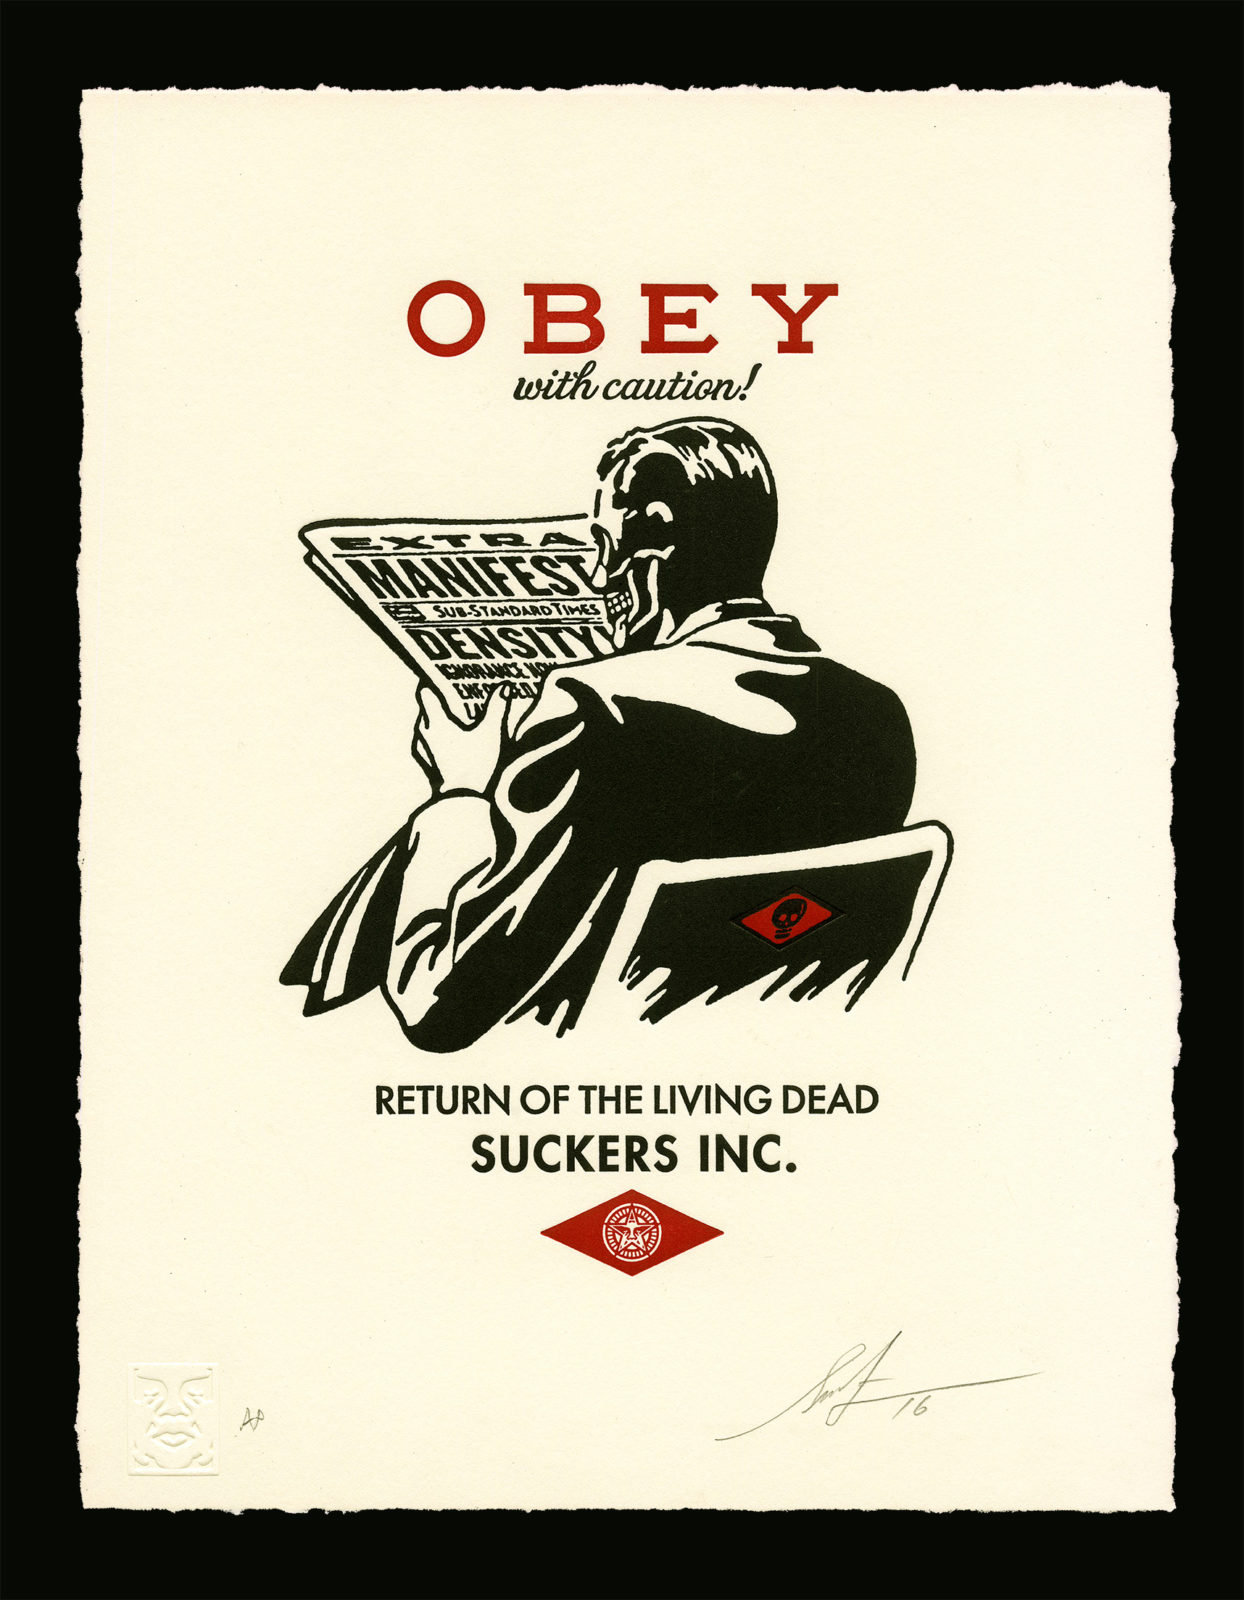 obey_with_caution-letterpress